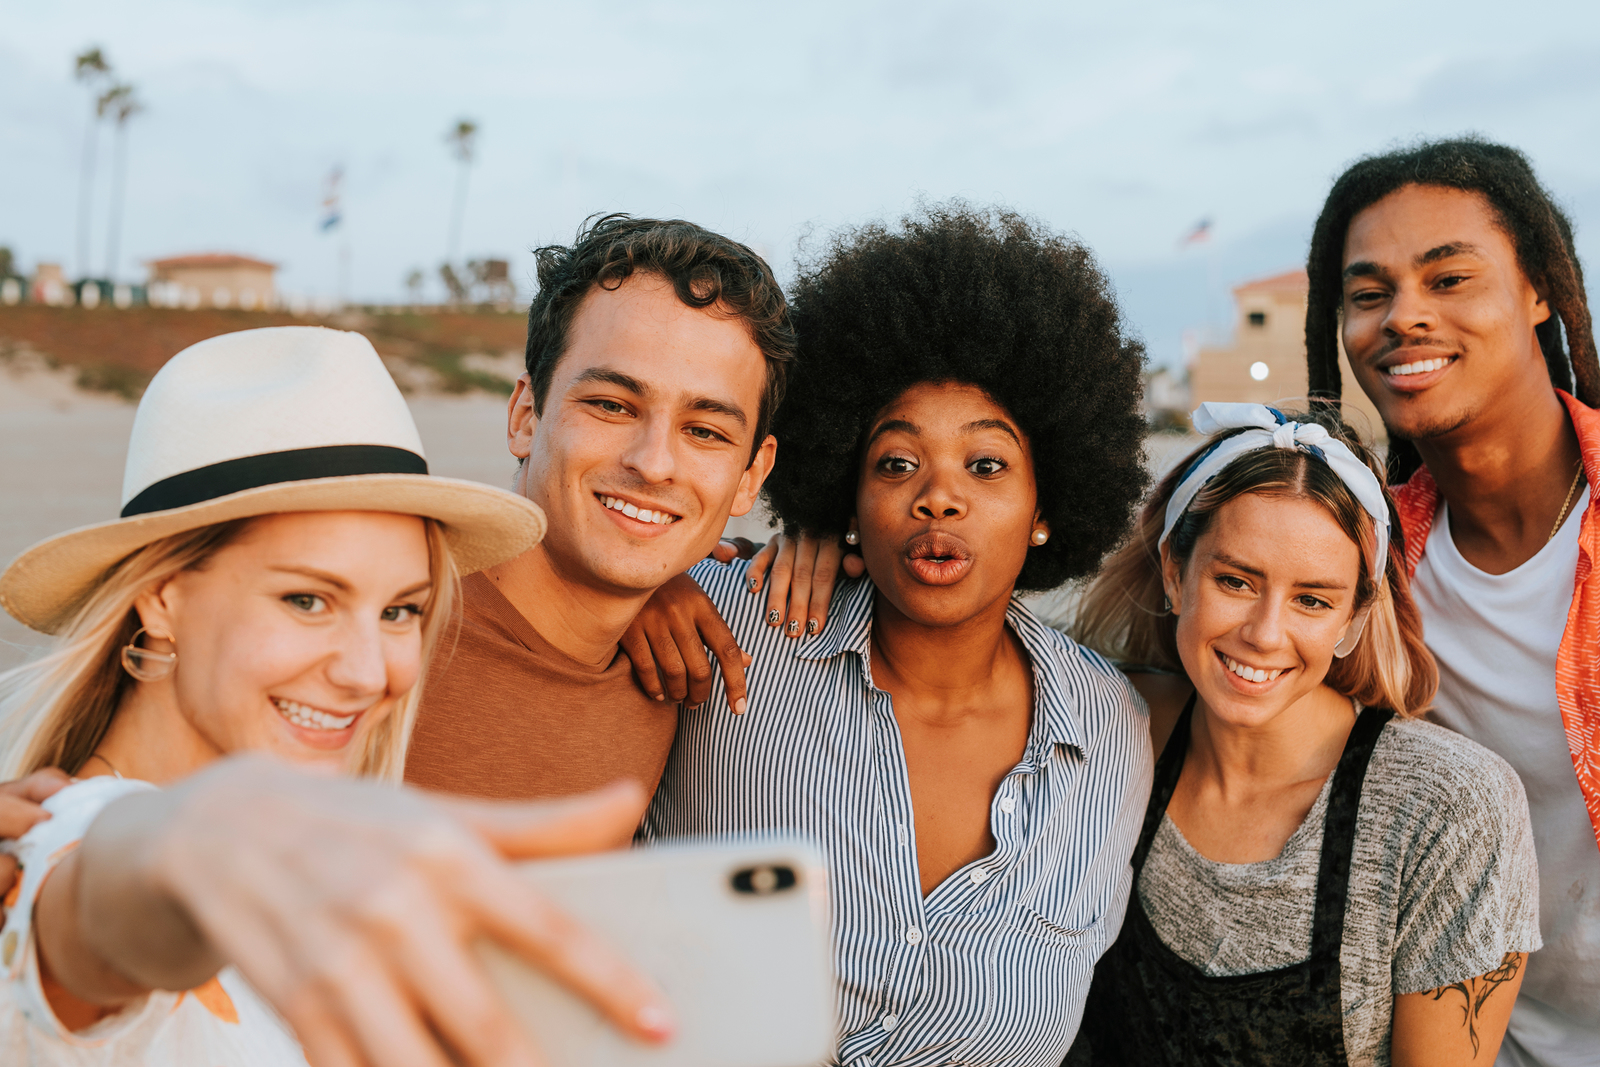 Image of a large group of attractive young and stylish multi ethnic friends taking a selfie together near a sunny outdoors environment.